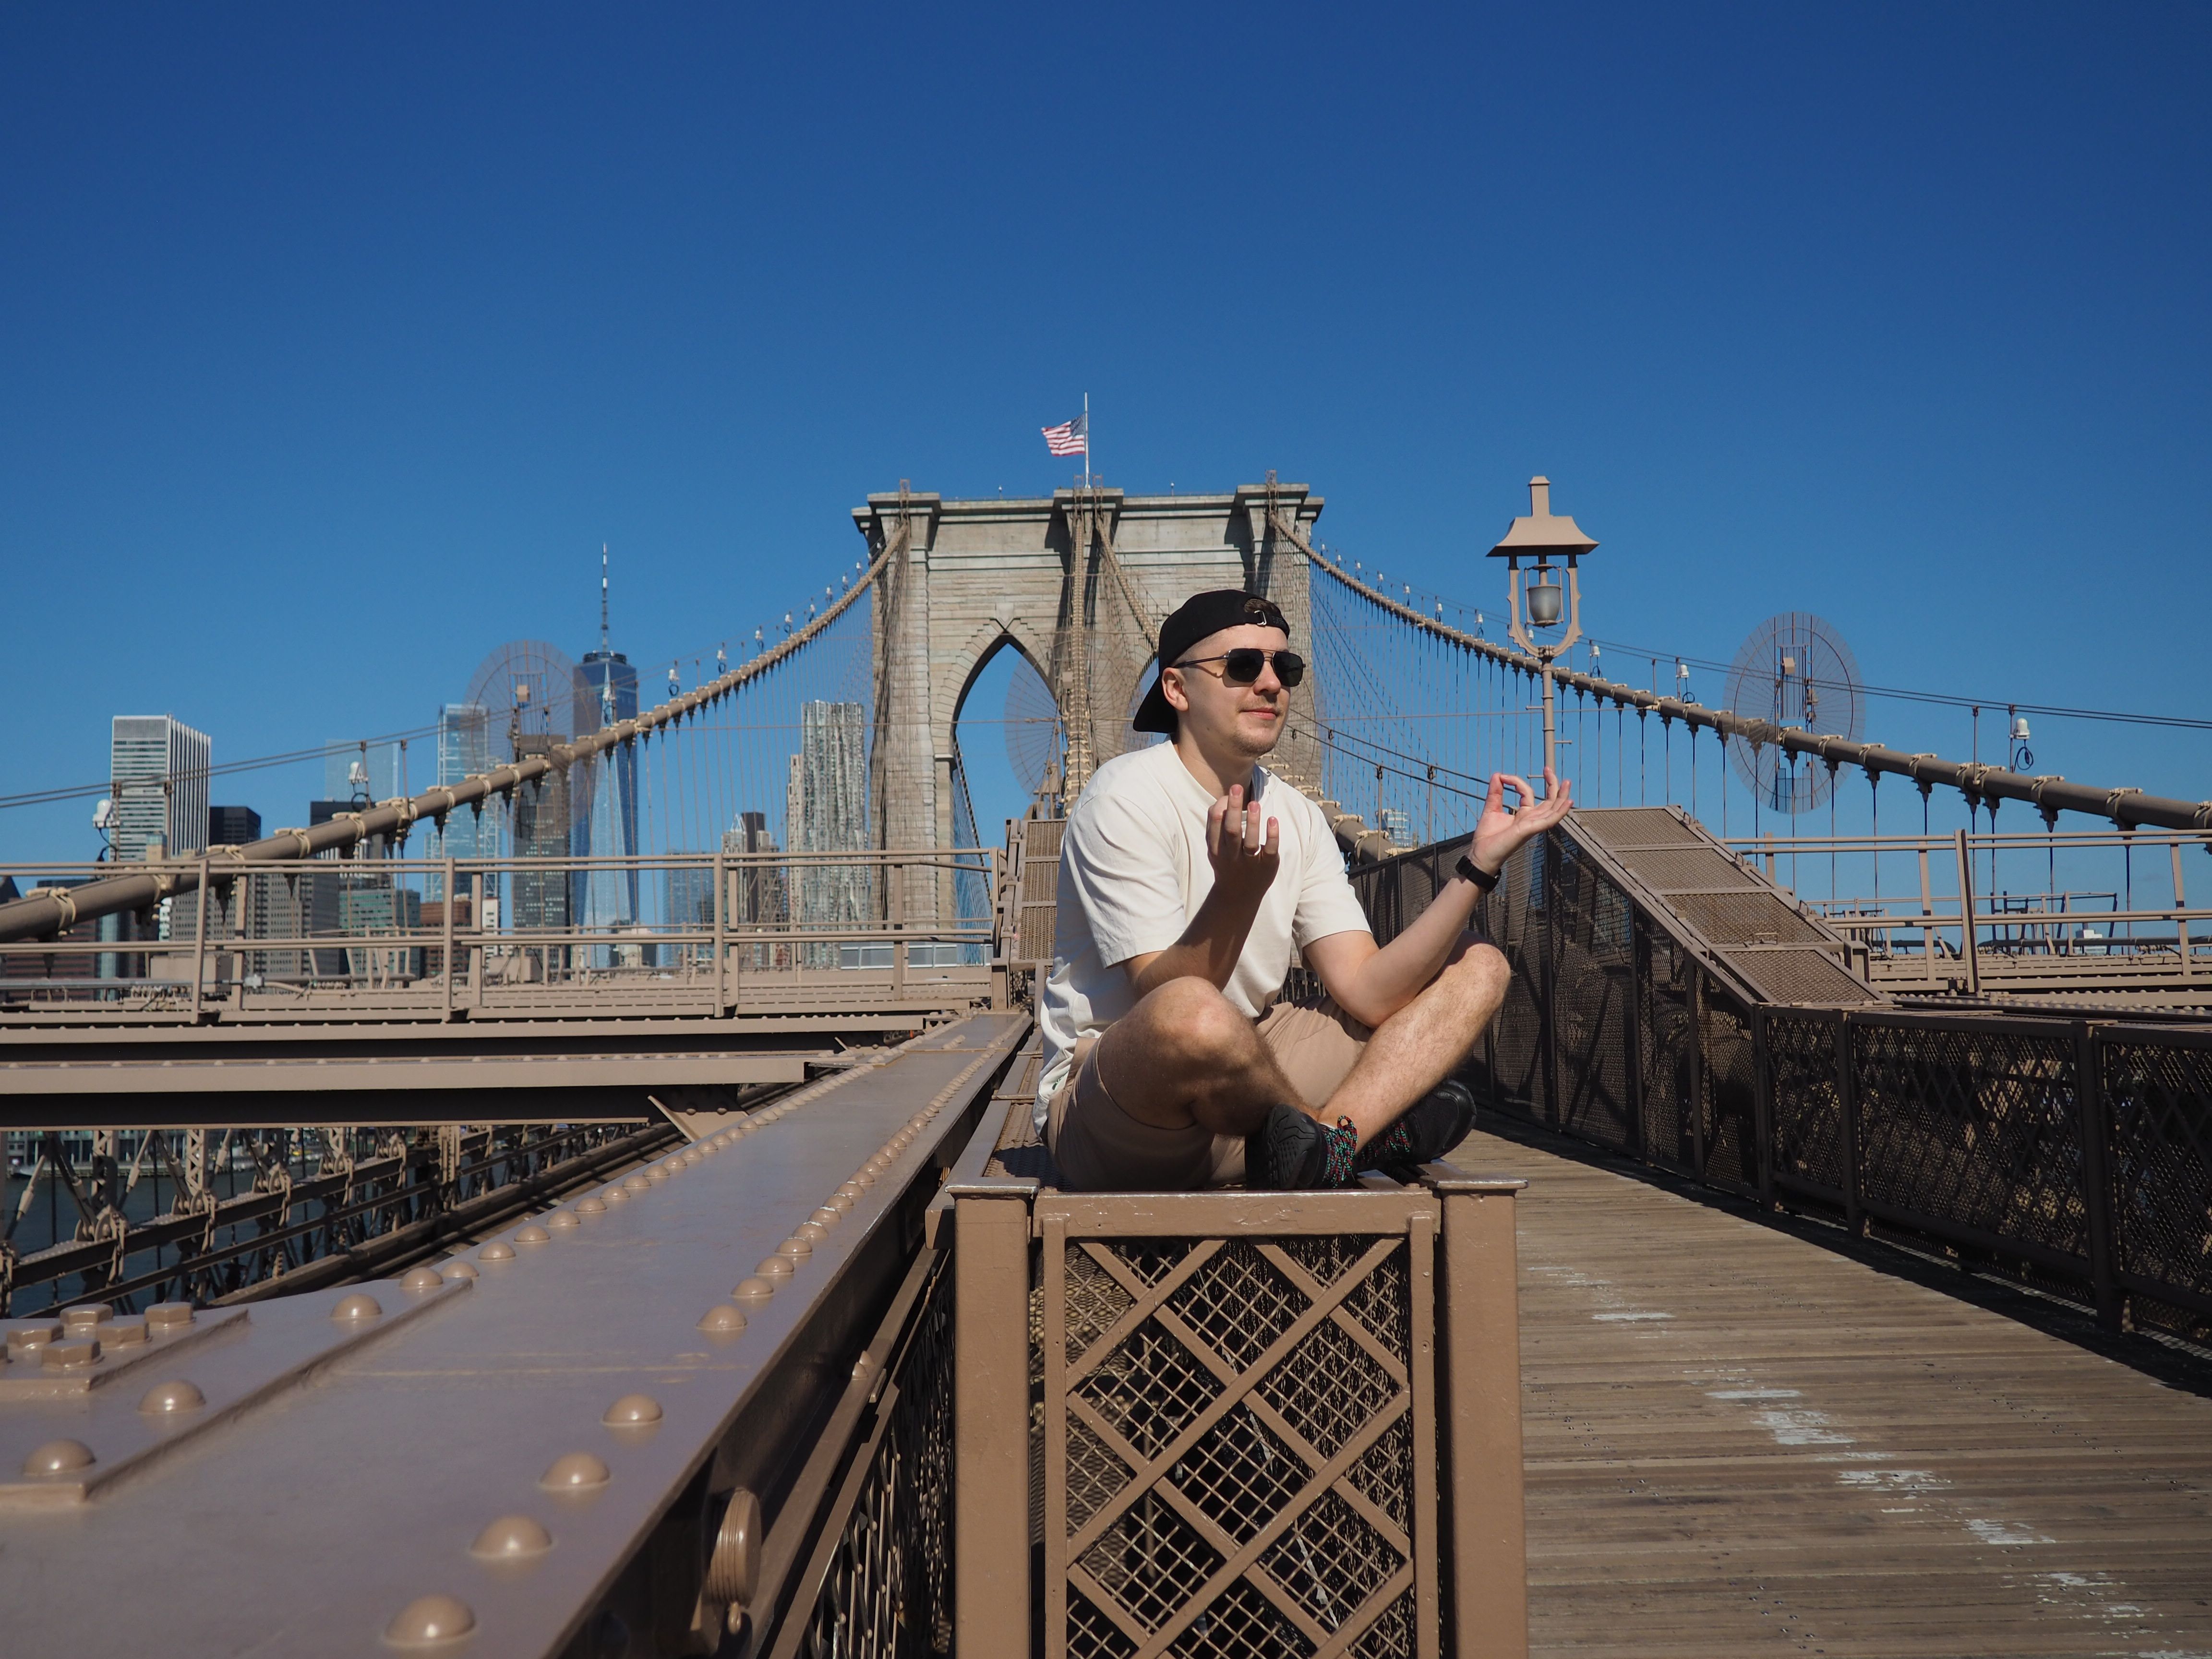 Photo with a man in sunglasses sitting on the bridge, sky in the background.